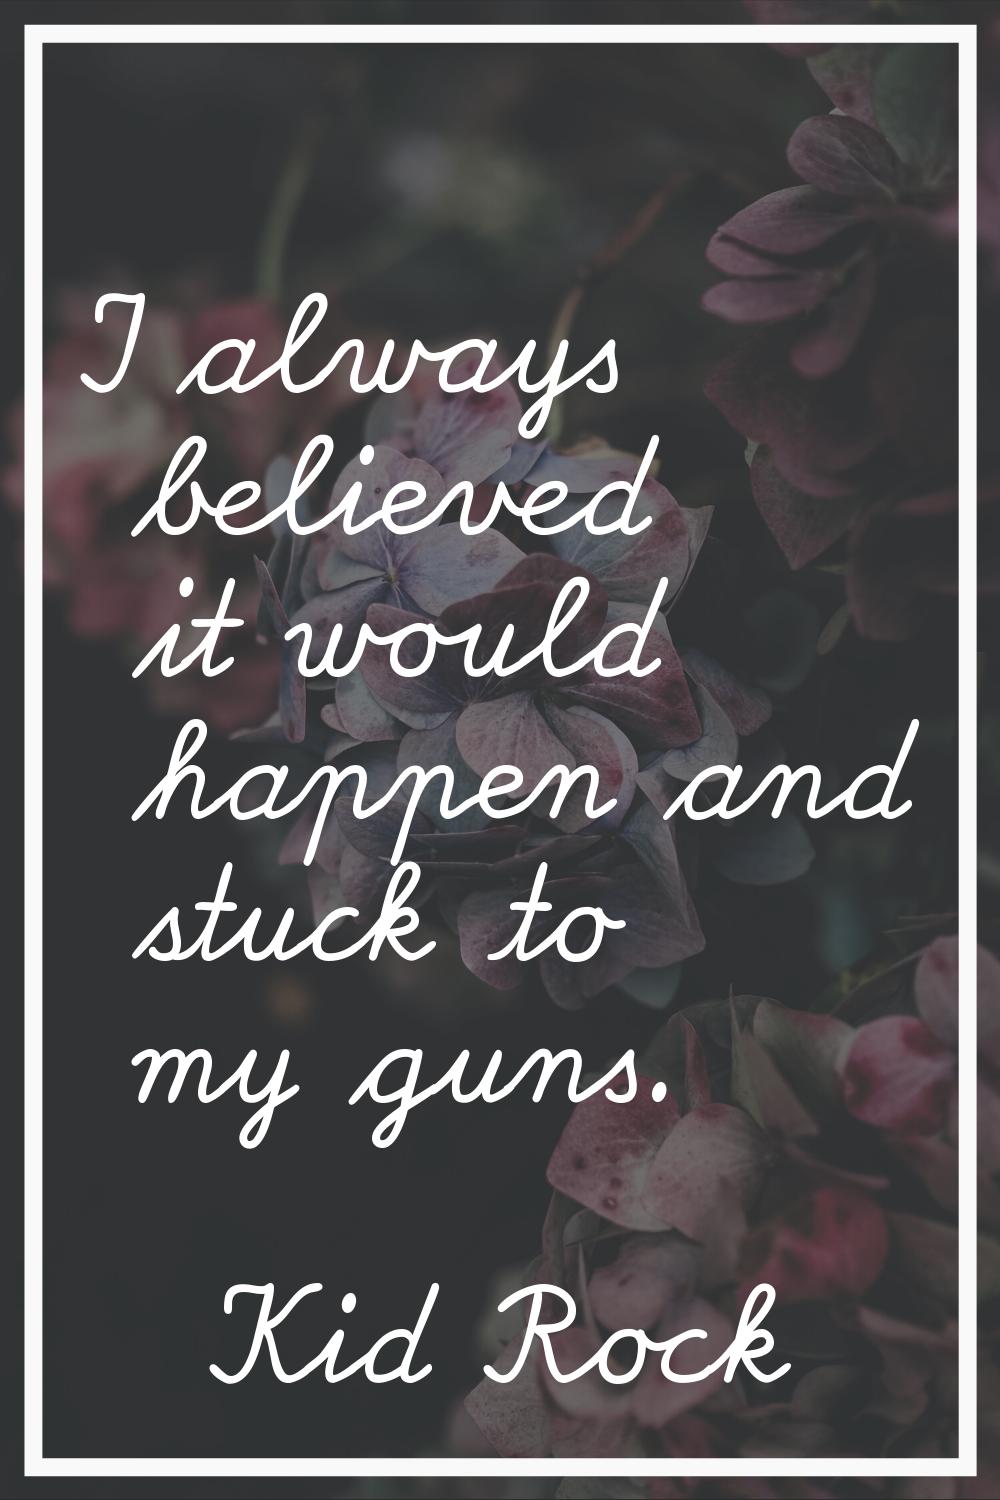 I always believed it would happen and stuck to my guns.